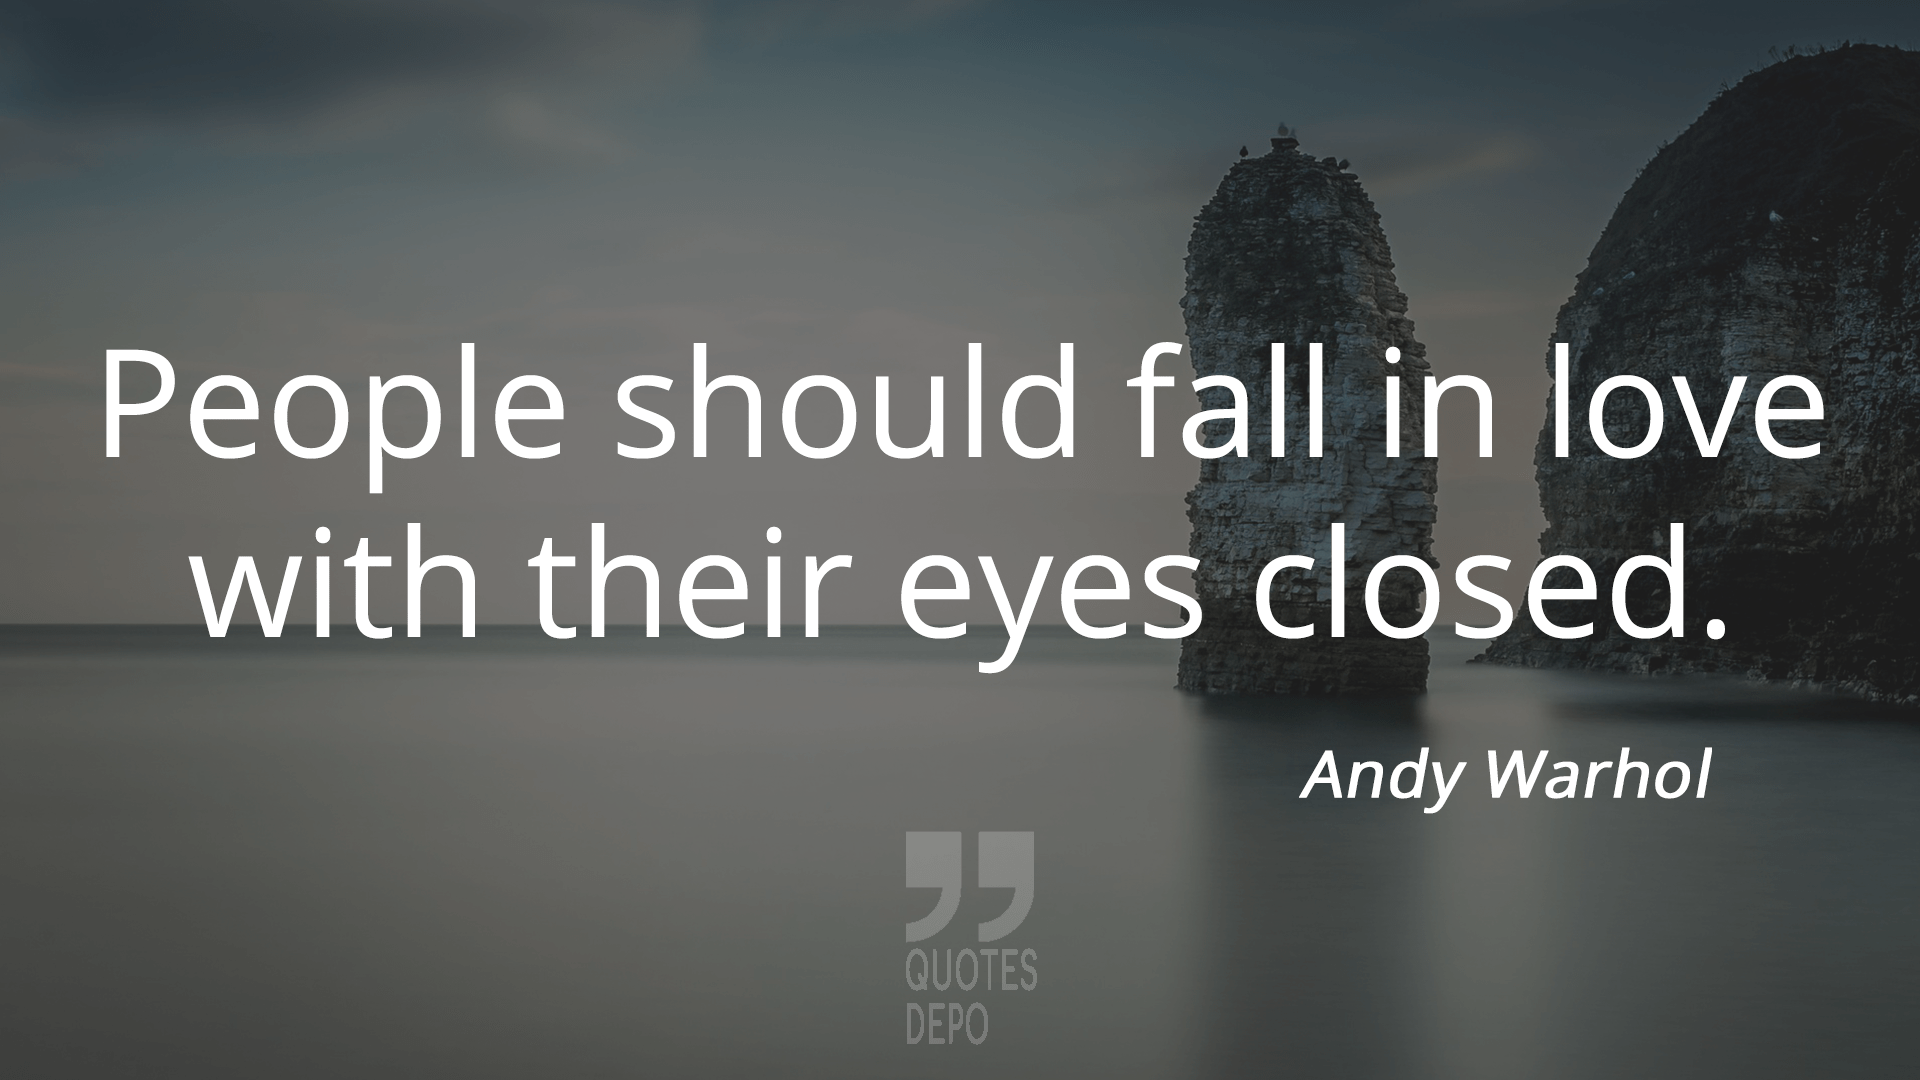 people should fall in love with their eyes closed - andy warhol quotes